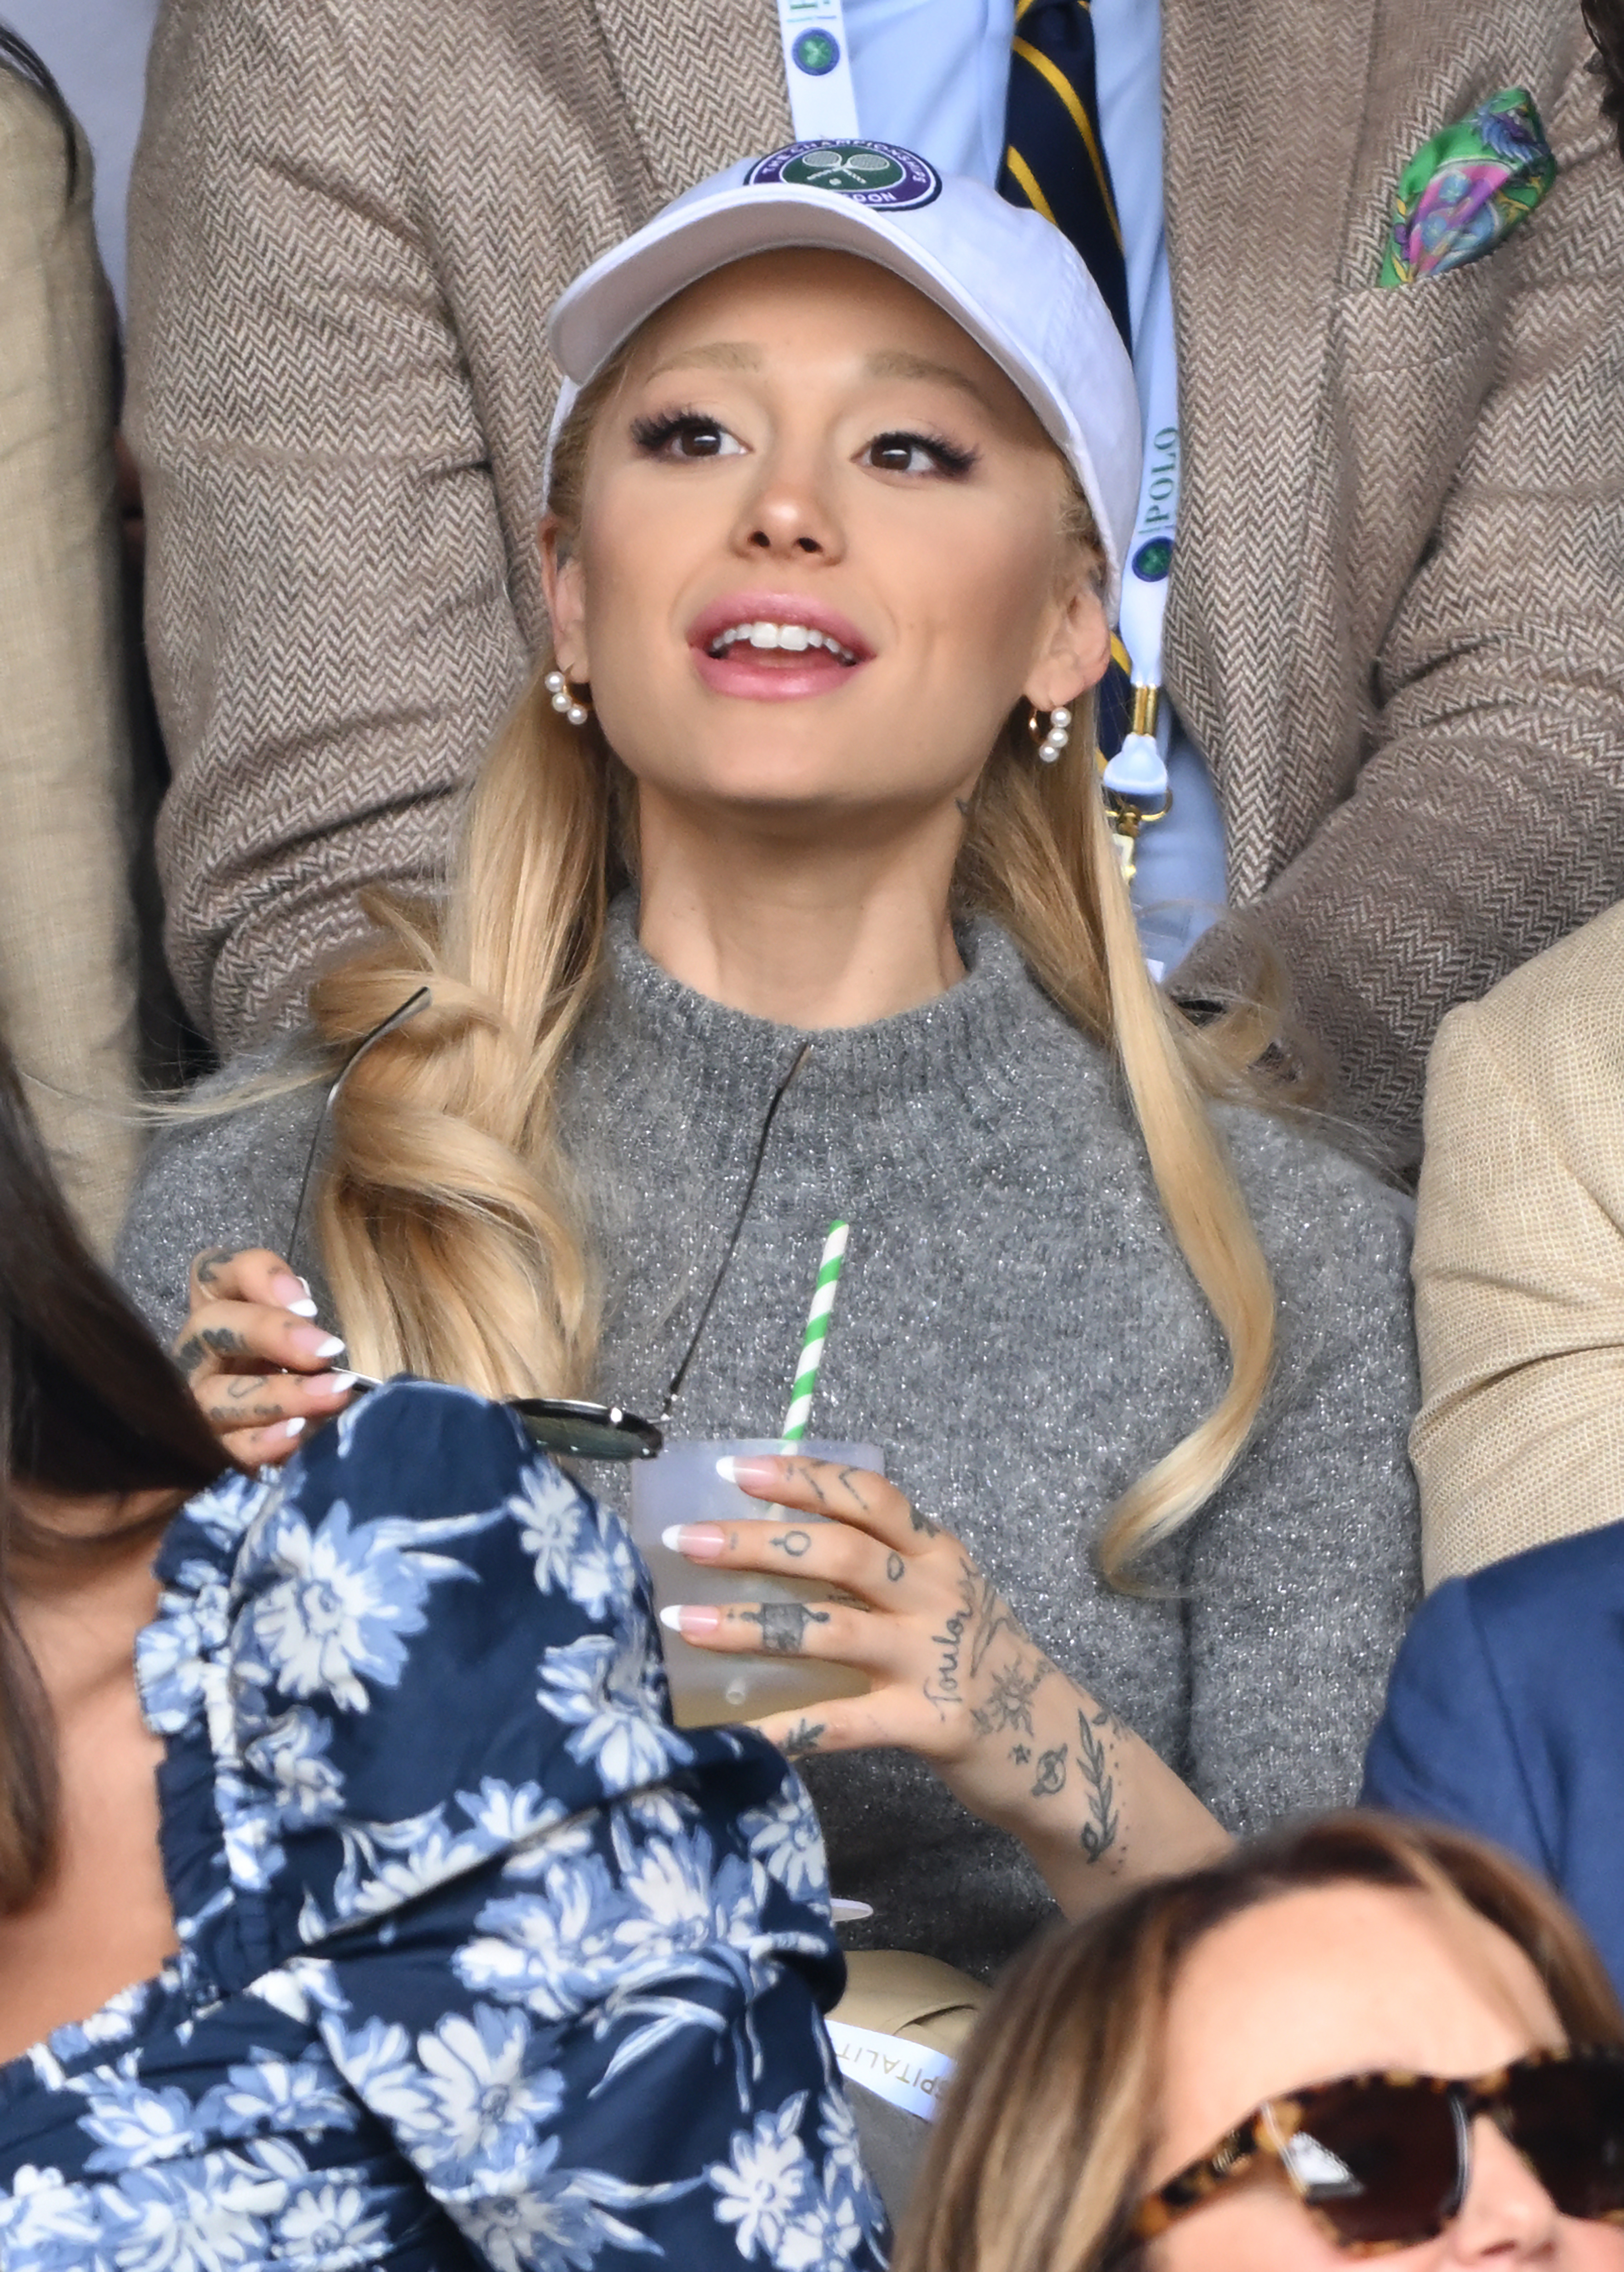 ariana sitting in the audience for a sports event